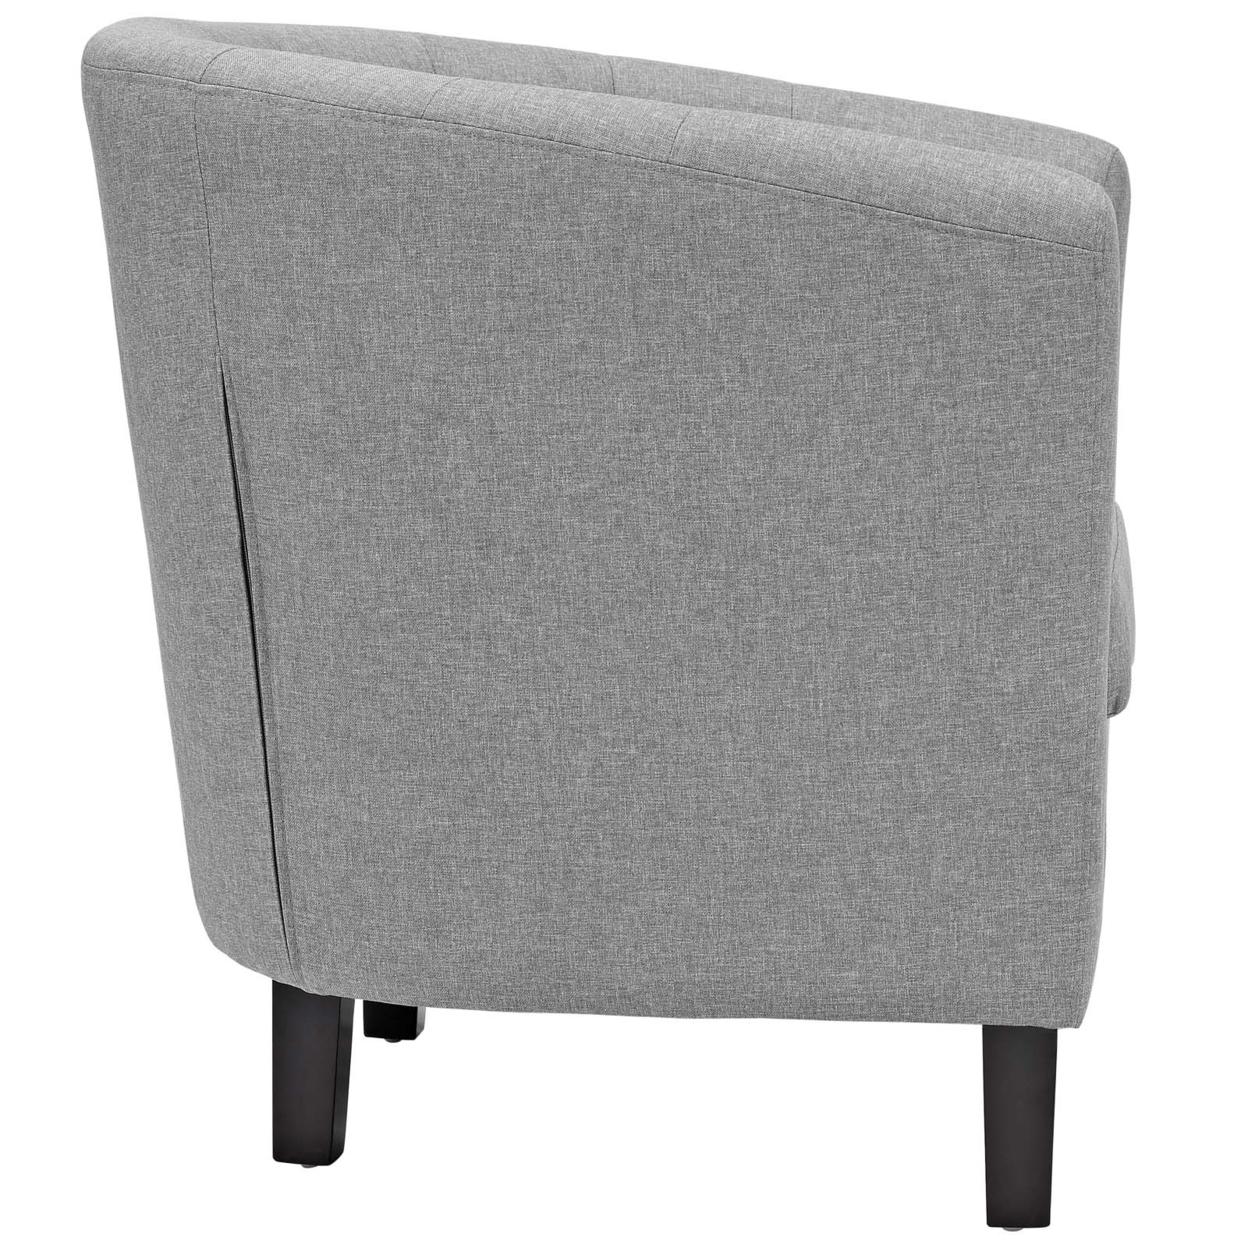 Prospect 2 Piece Upholstered Fabric Loveseat And Armchair Set, Light Gray